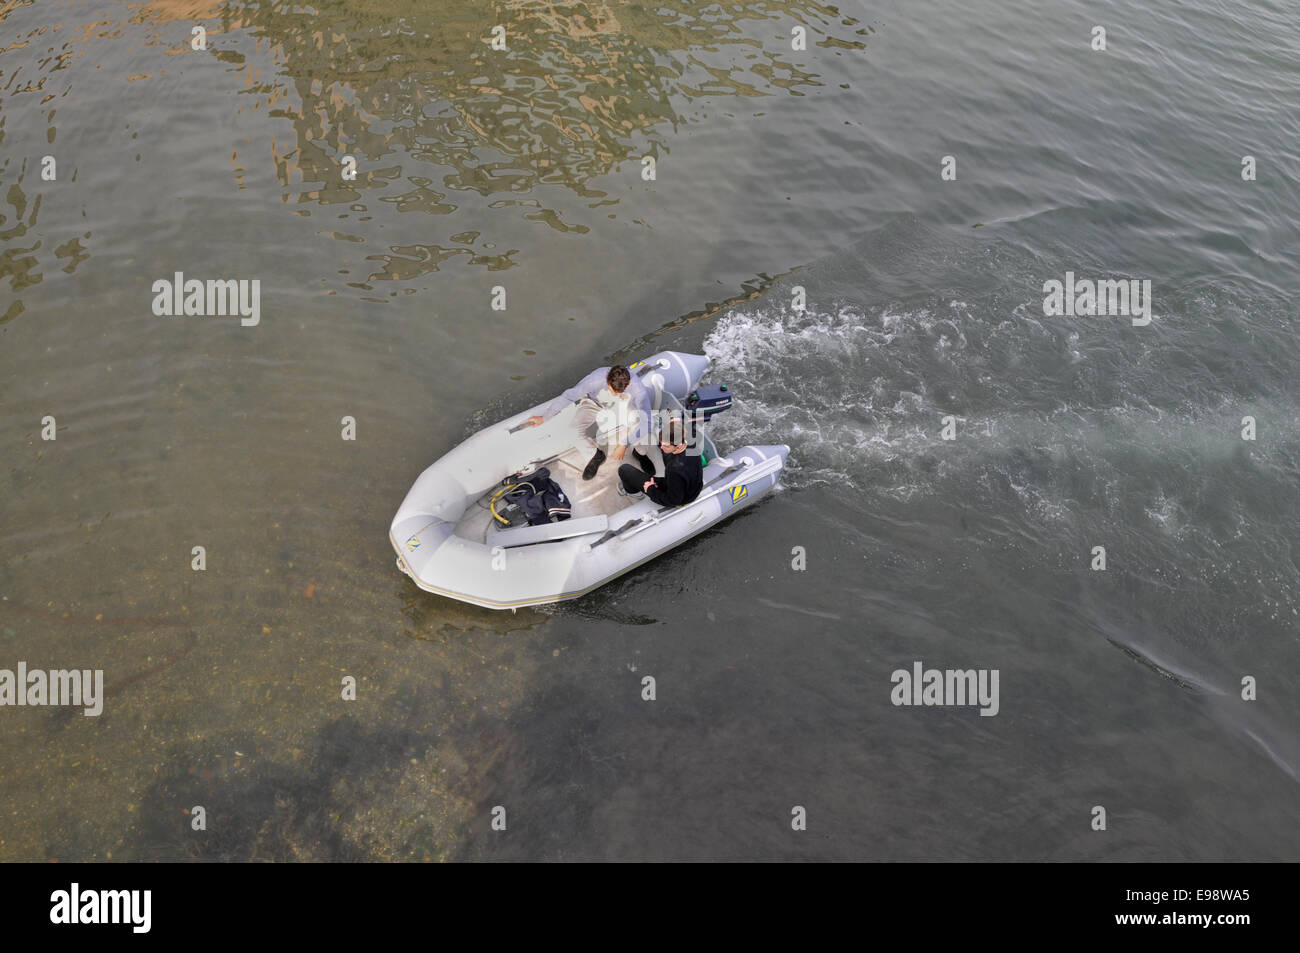 Dinghy in water, high angle view Stock Photo